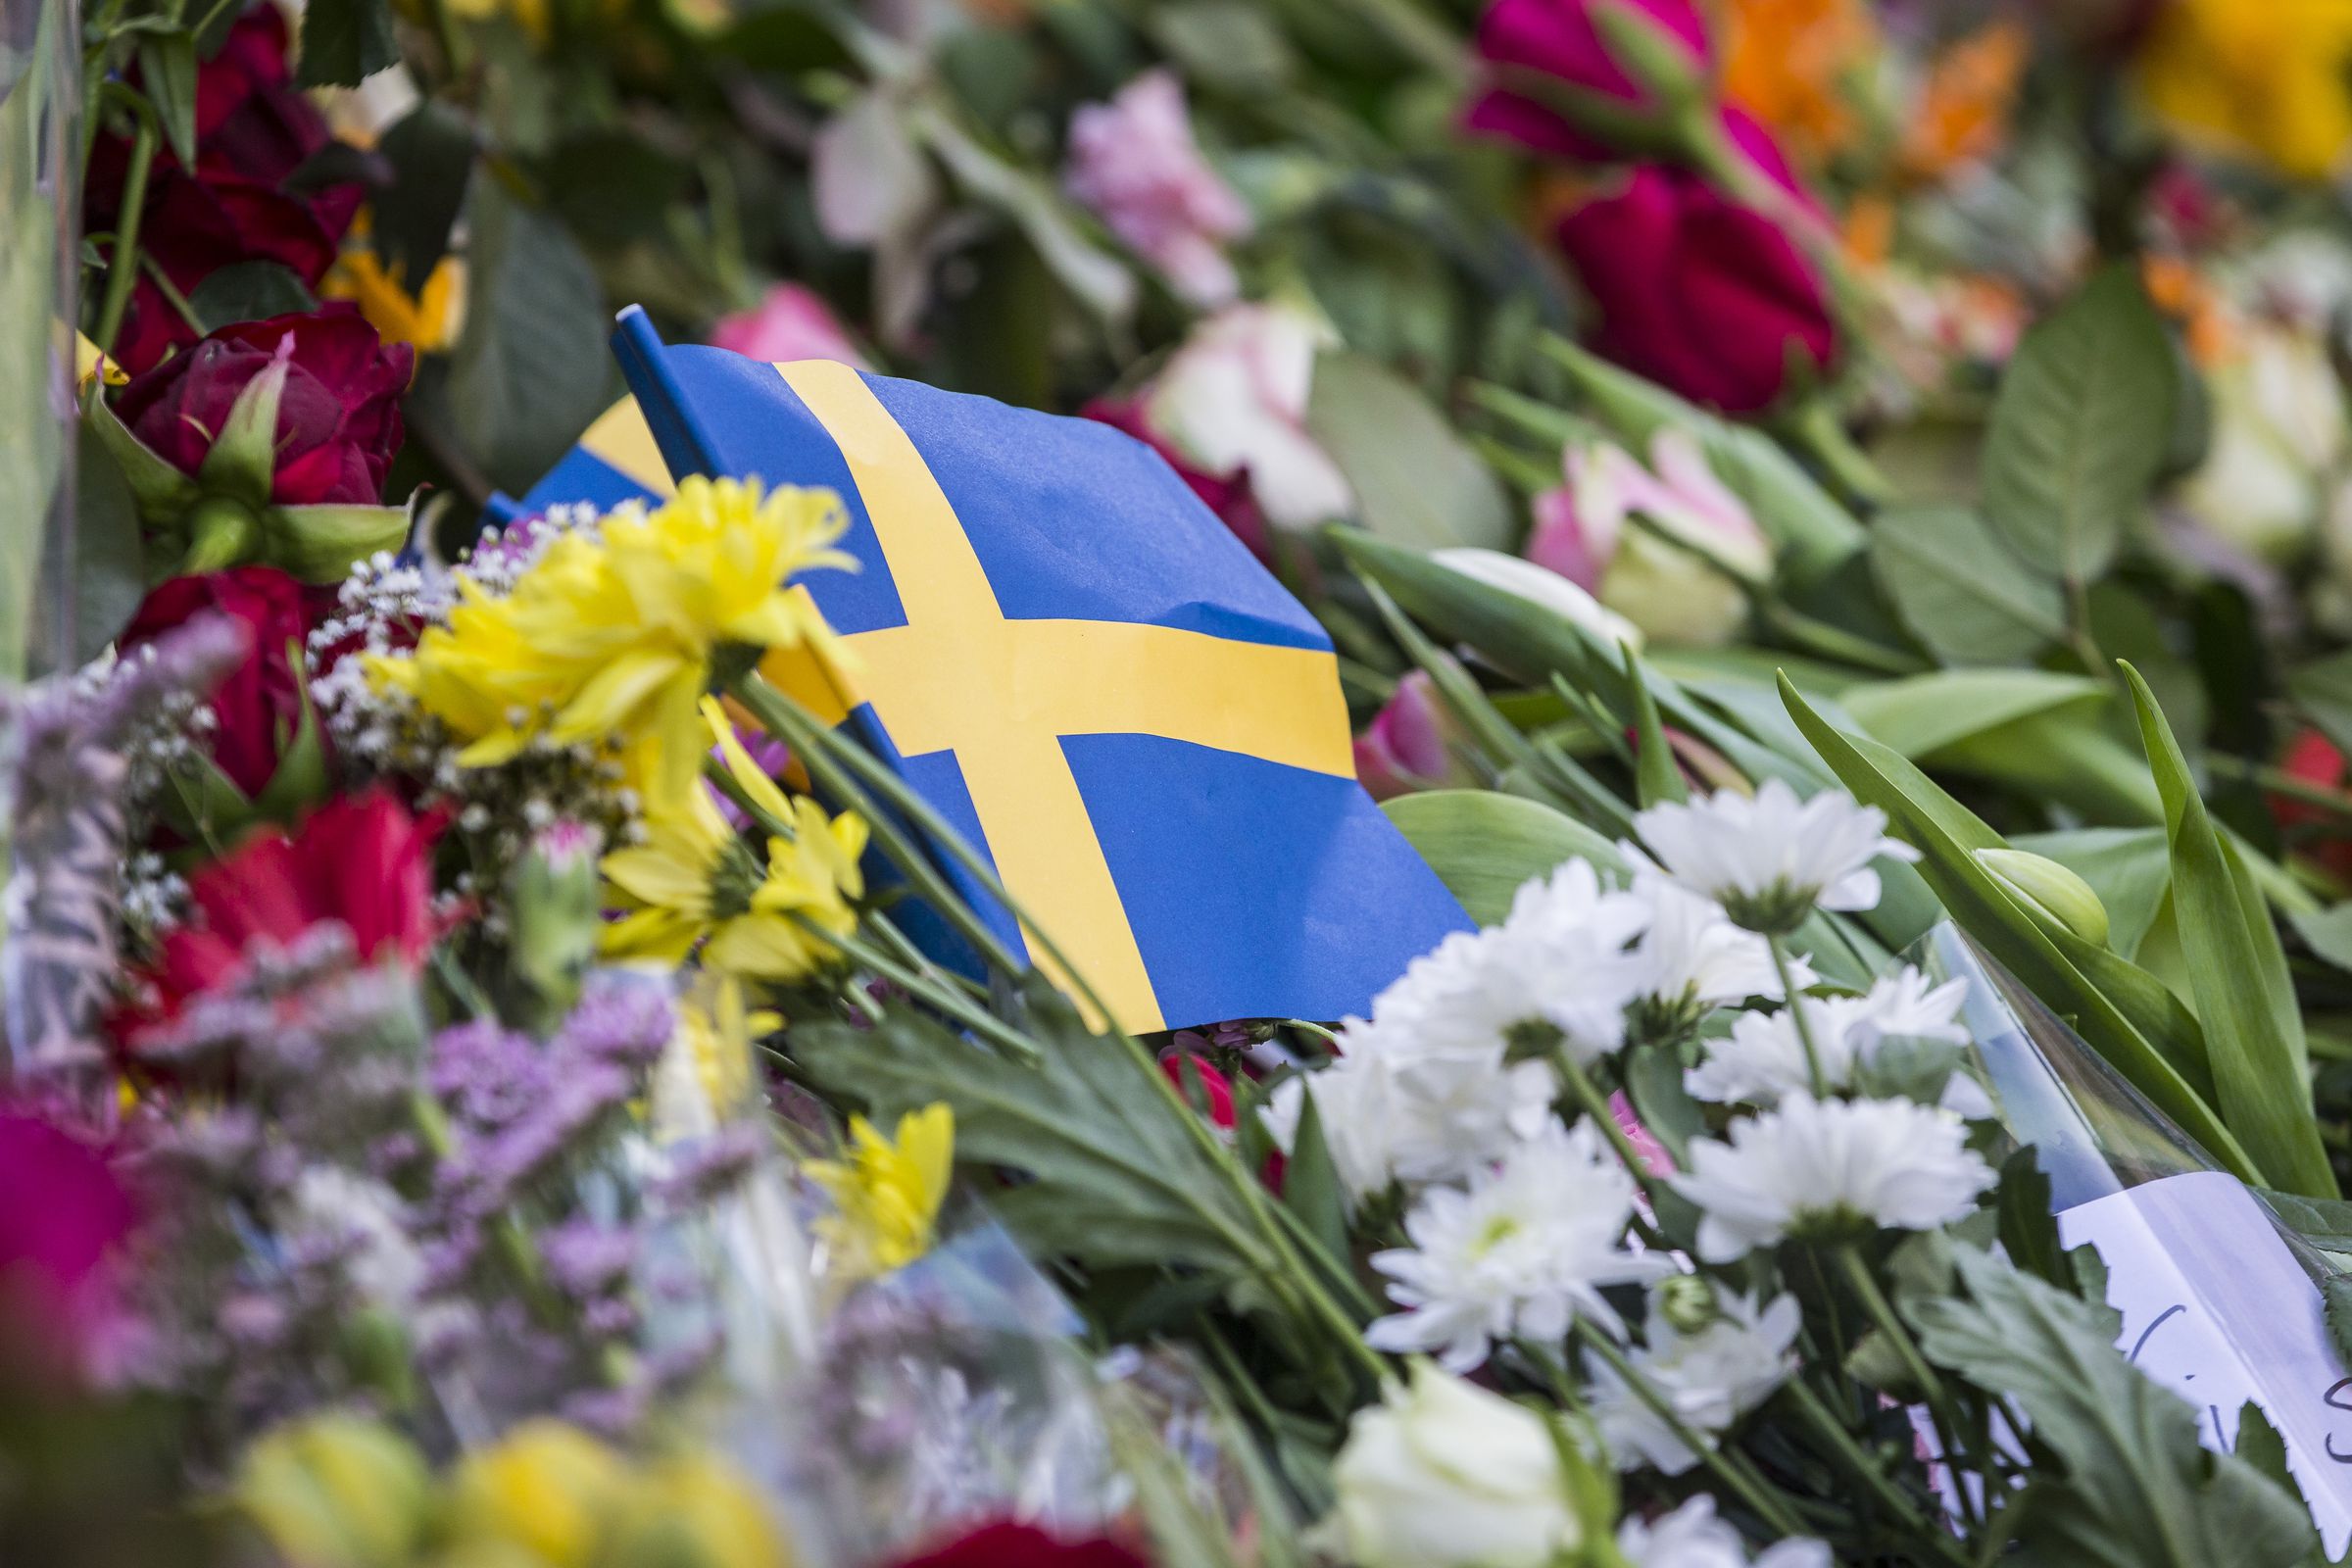 Tributes And Vigil For Victims Of Stockholm Truck Attack